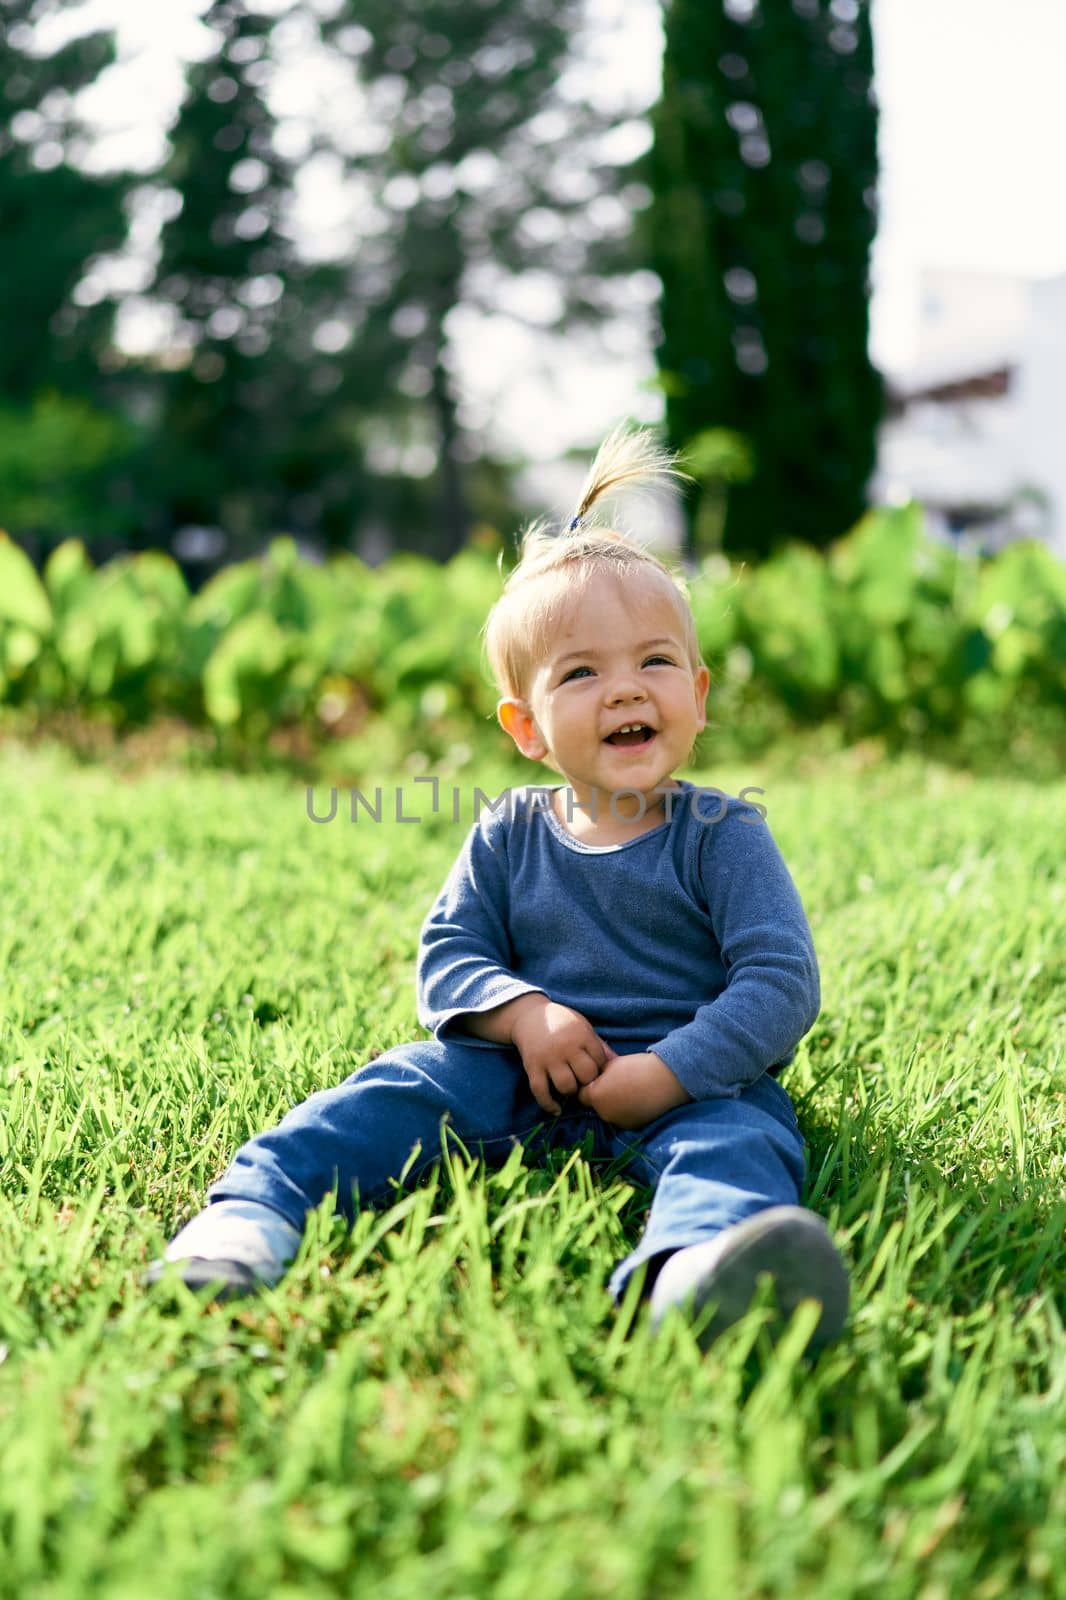 Laughing kid with a ponytail sits on a green lawn by Nadtochiy